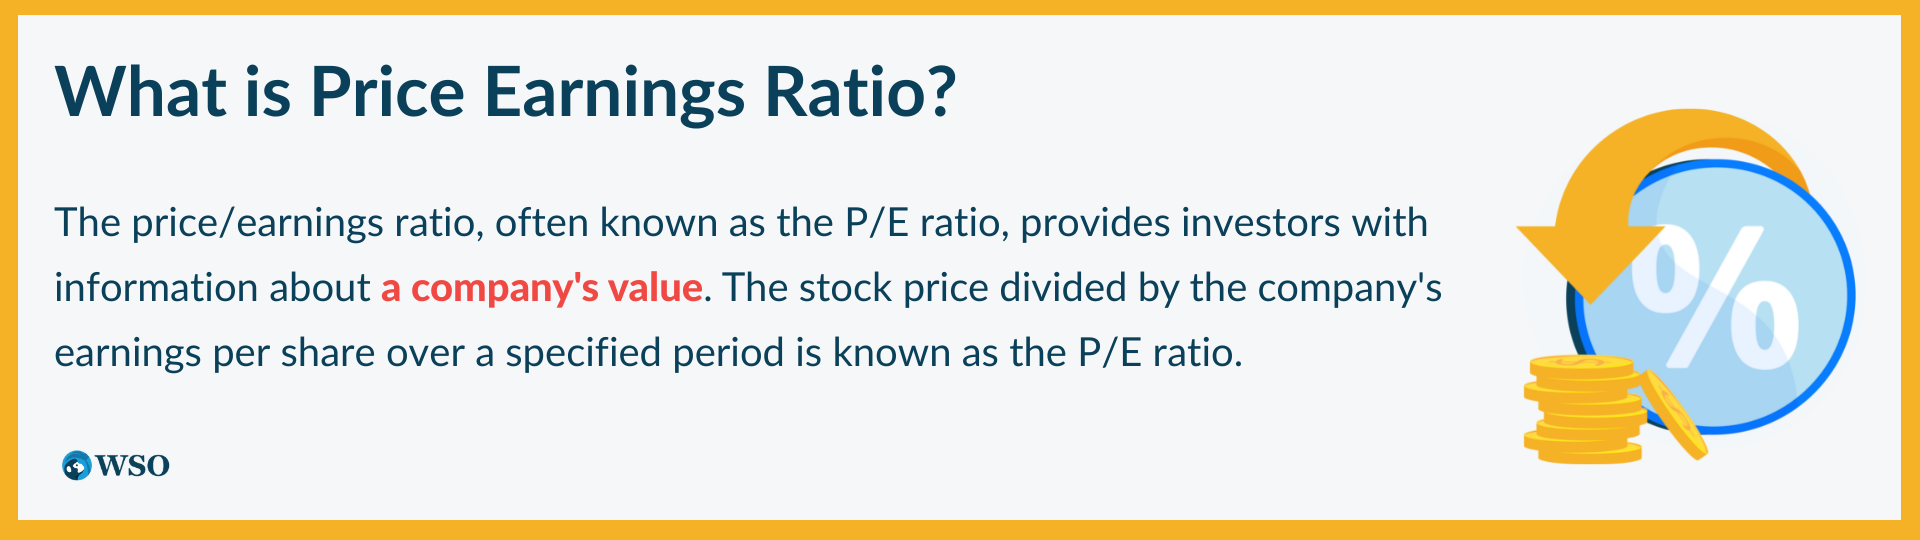 What is Price Earnings Ratio?